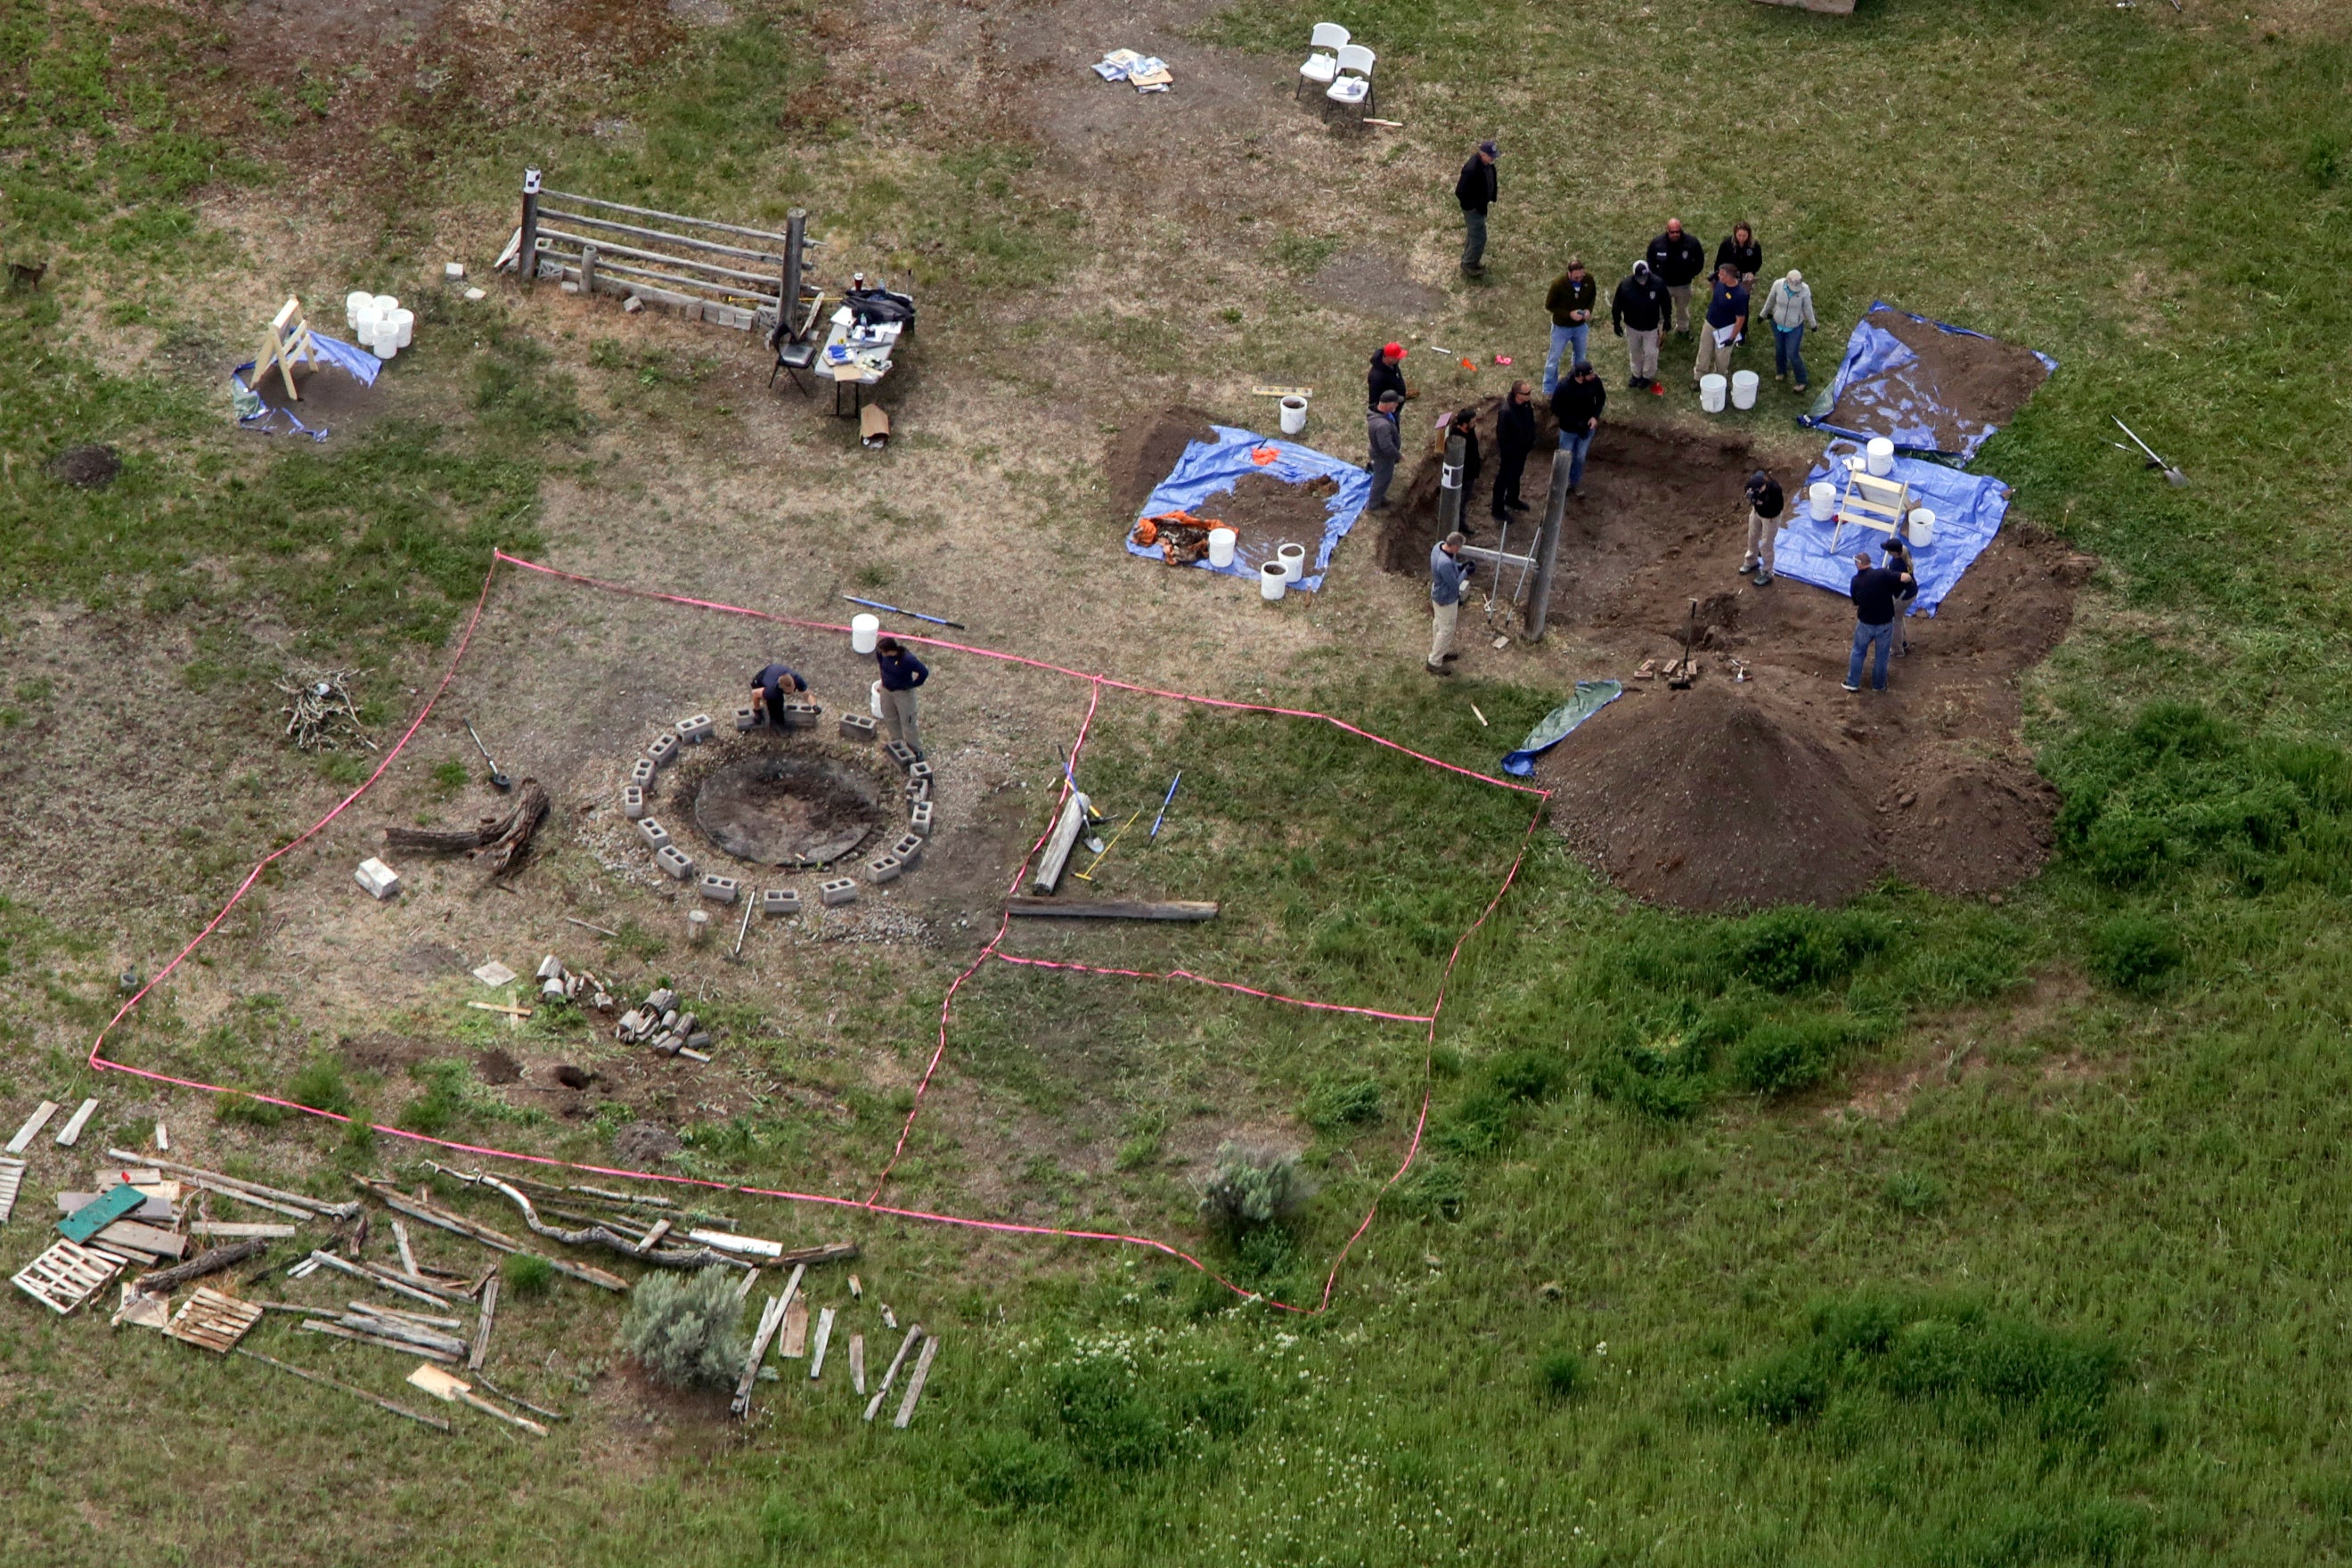 Nine months after they were last seen alive, the children were found buried on Daybell’s property